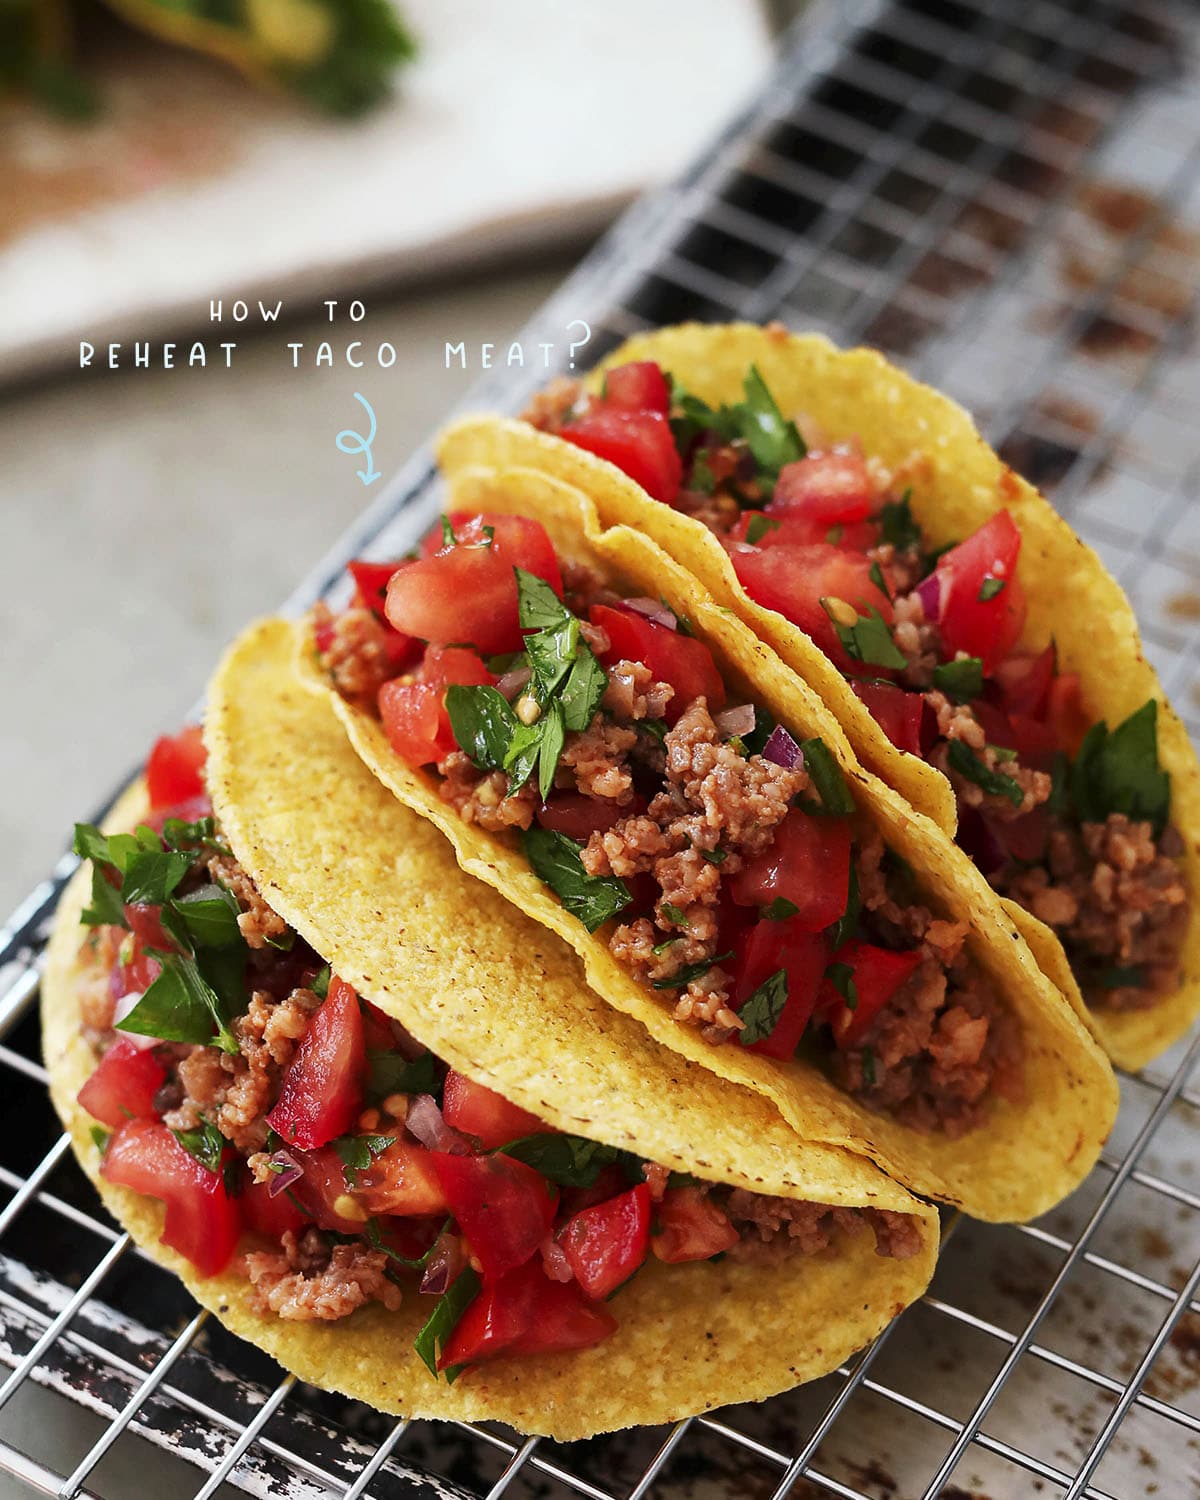 Reheating meat on too high of a heat can cause it to dry out. Because high heat causes the mixture to lose moisture, it's best to reheat taco meat on low or moderate heat.